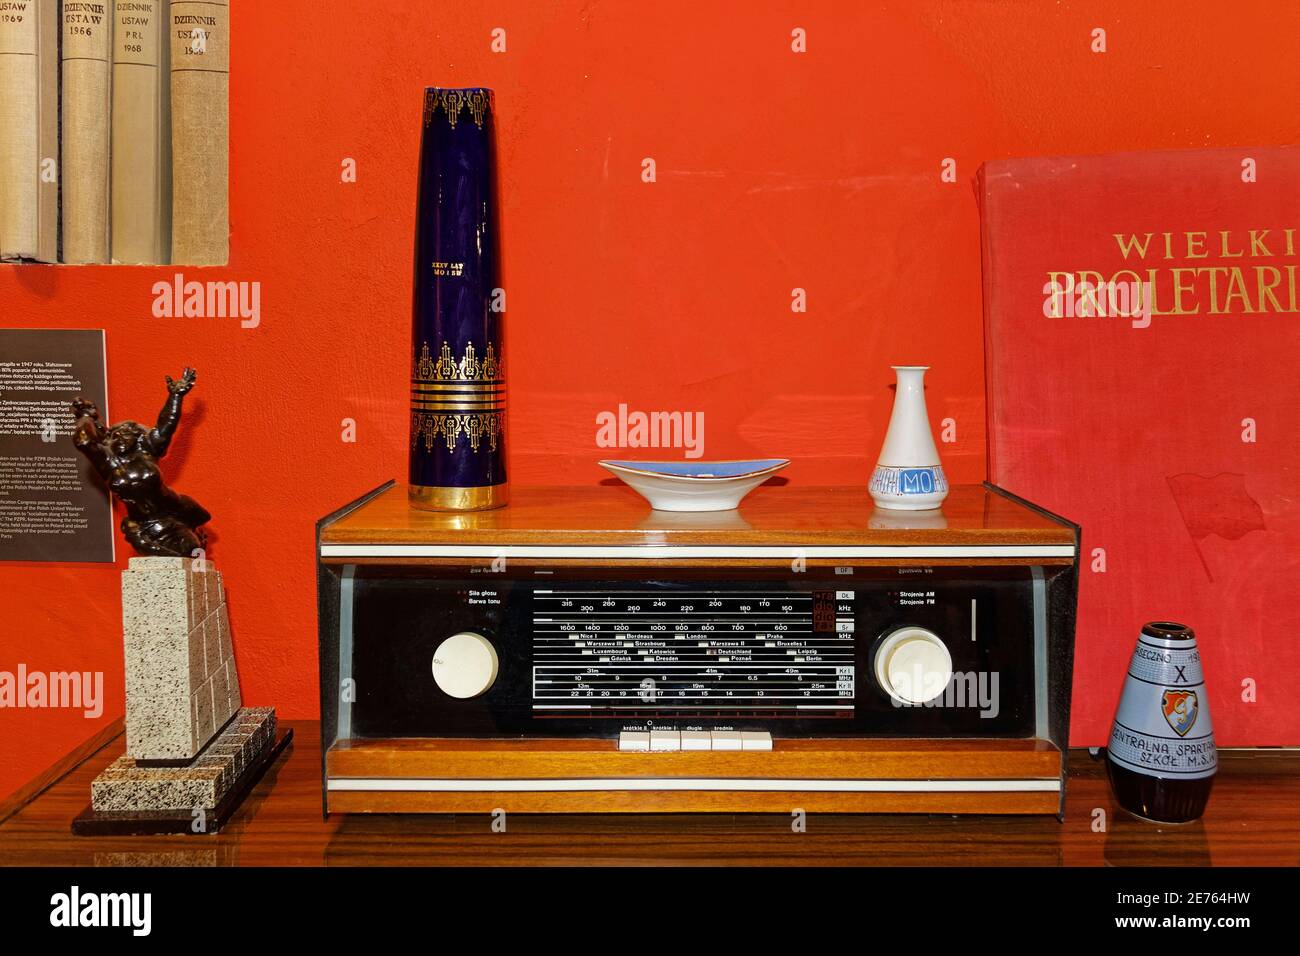 Warsaw, Poland - January 14, 2021. Old-fashioned radio receiver from communism-era exhibited in Museum of Life under communism in Warsaw. Stock Photo